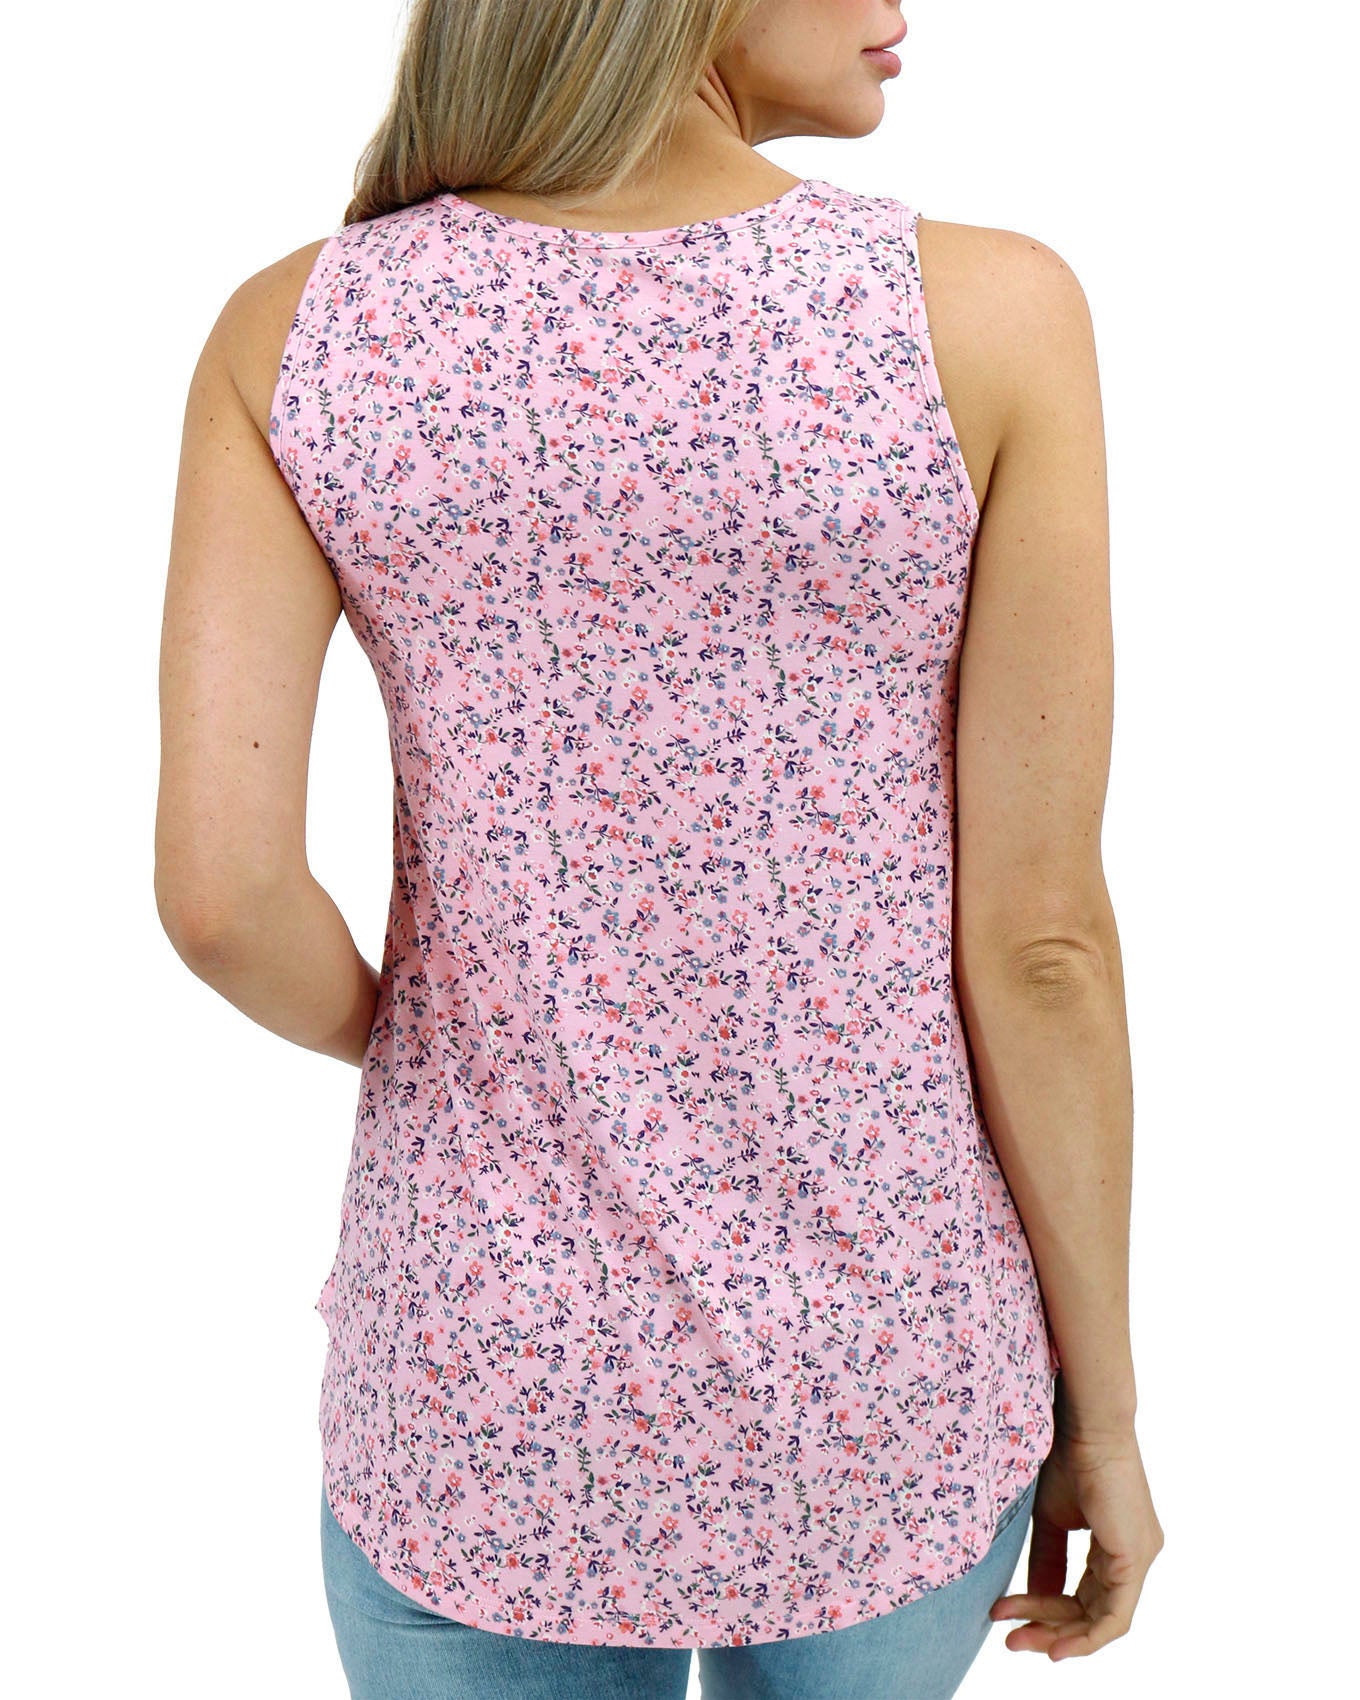 Back Stock shot of Pink Mini Floral Perfect Pocket Scoop Neck Tank